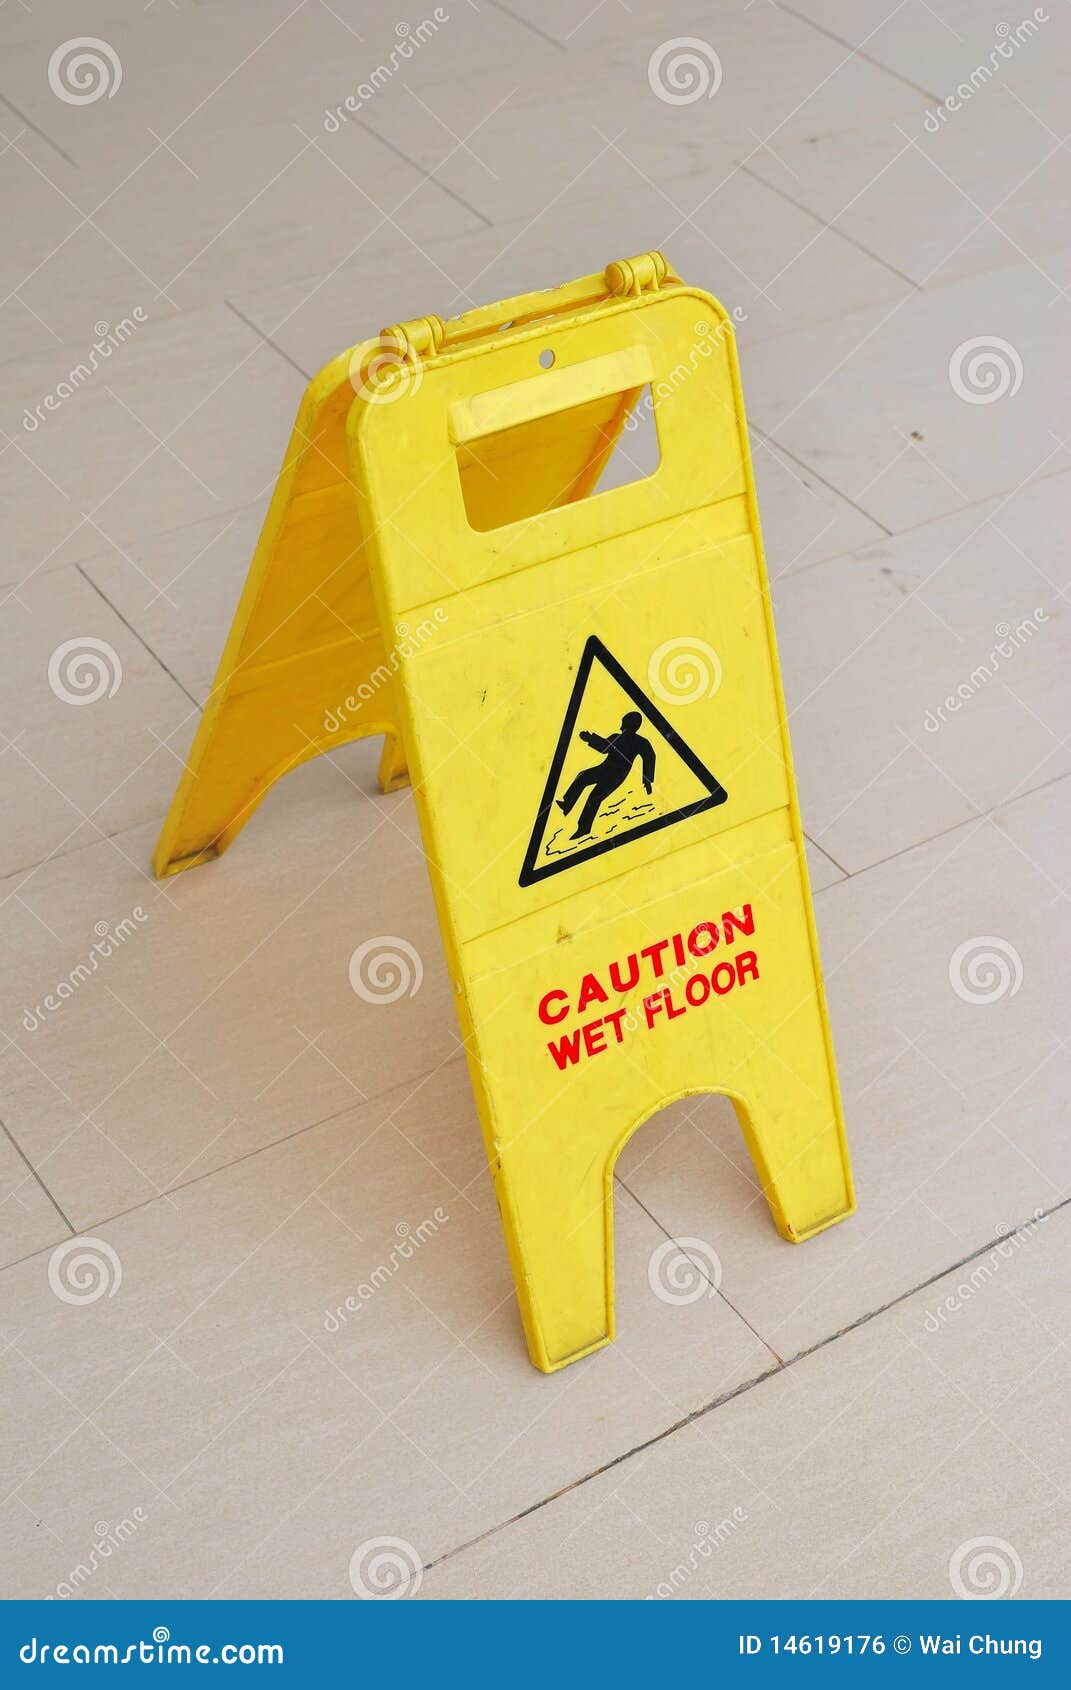 24-yellow-caution-wet-floor-sign-english-spanish-in-from-simplex